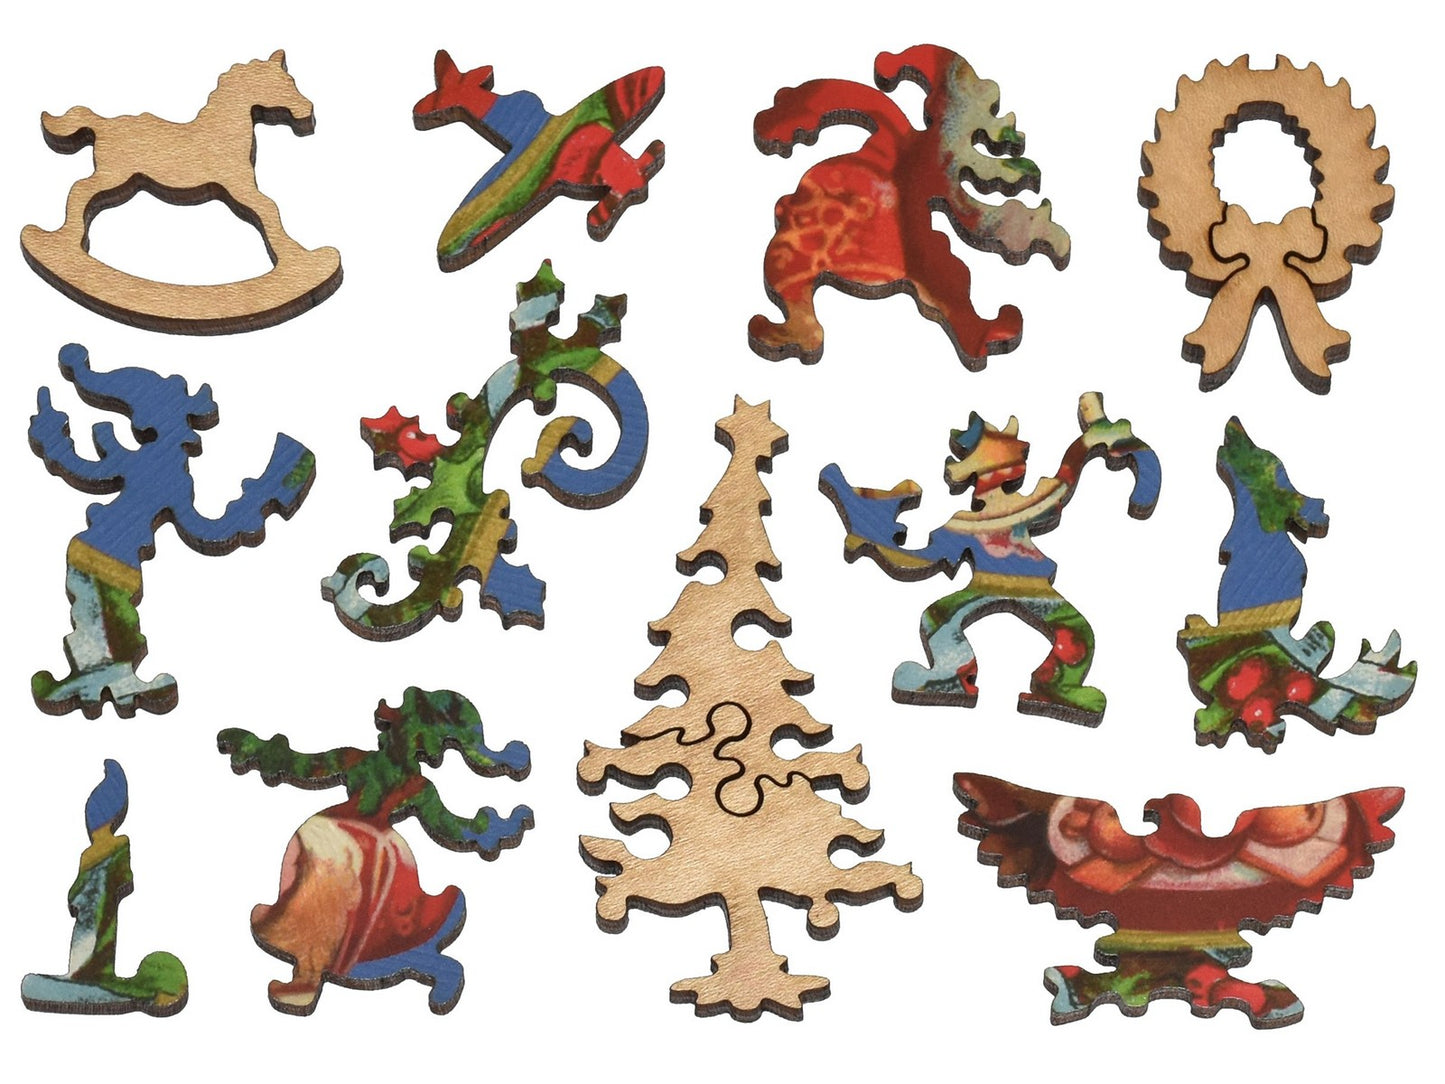 The whimsies that can be found in the puzzle, Santa's Treats.